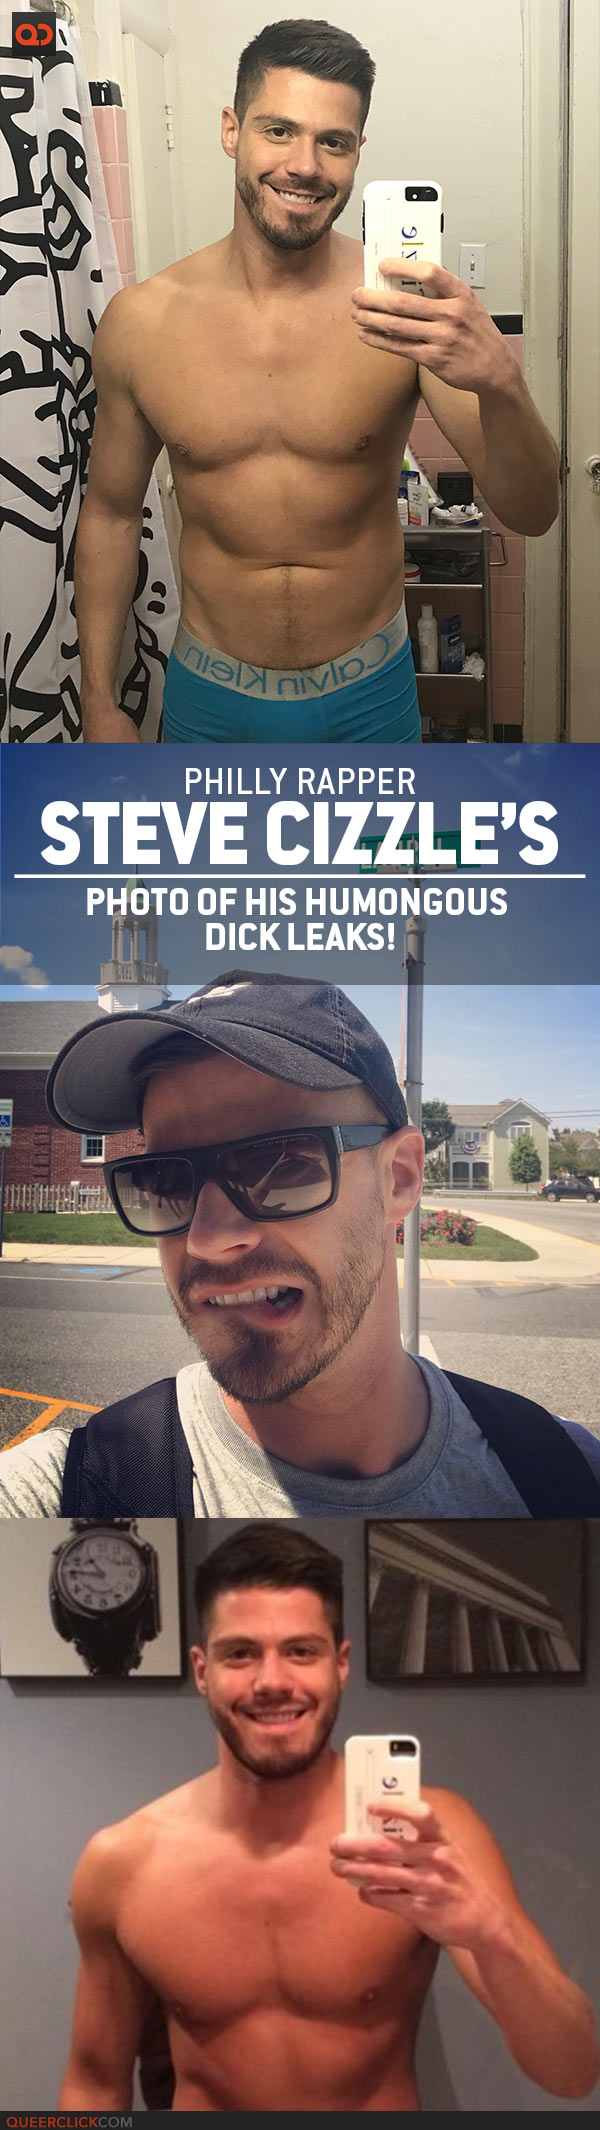 Philly Rapper Steve Cizzle's Photo Of His Humongous Dick Leaks!